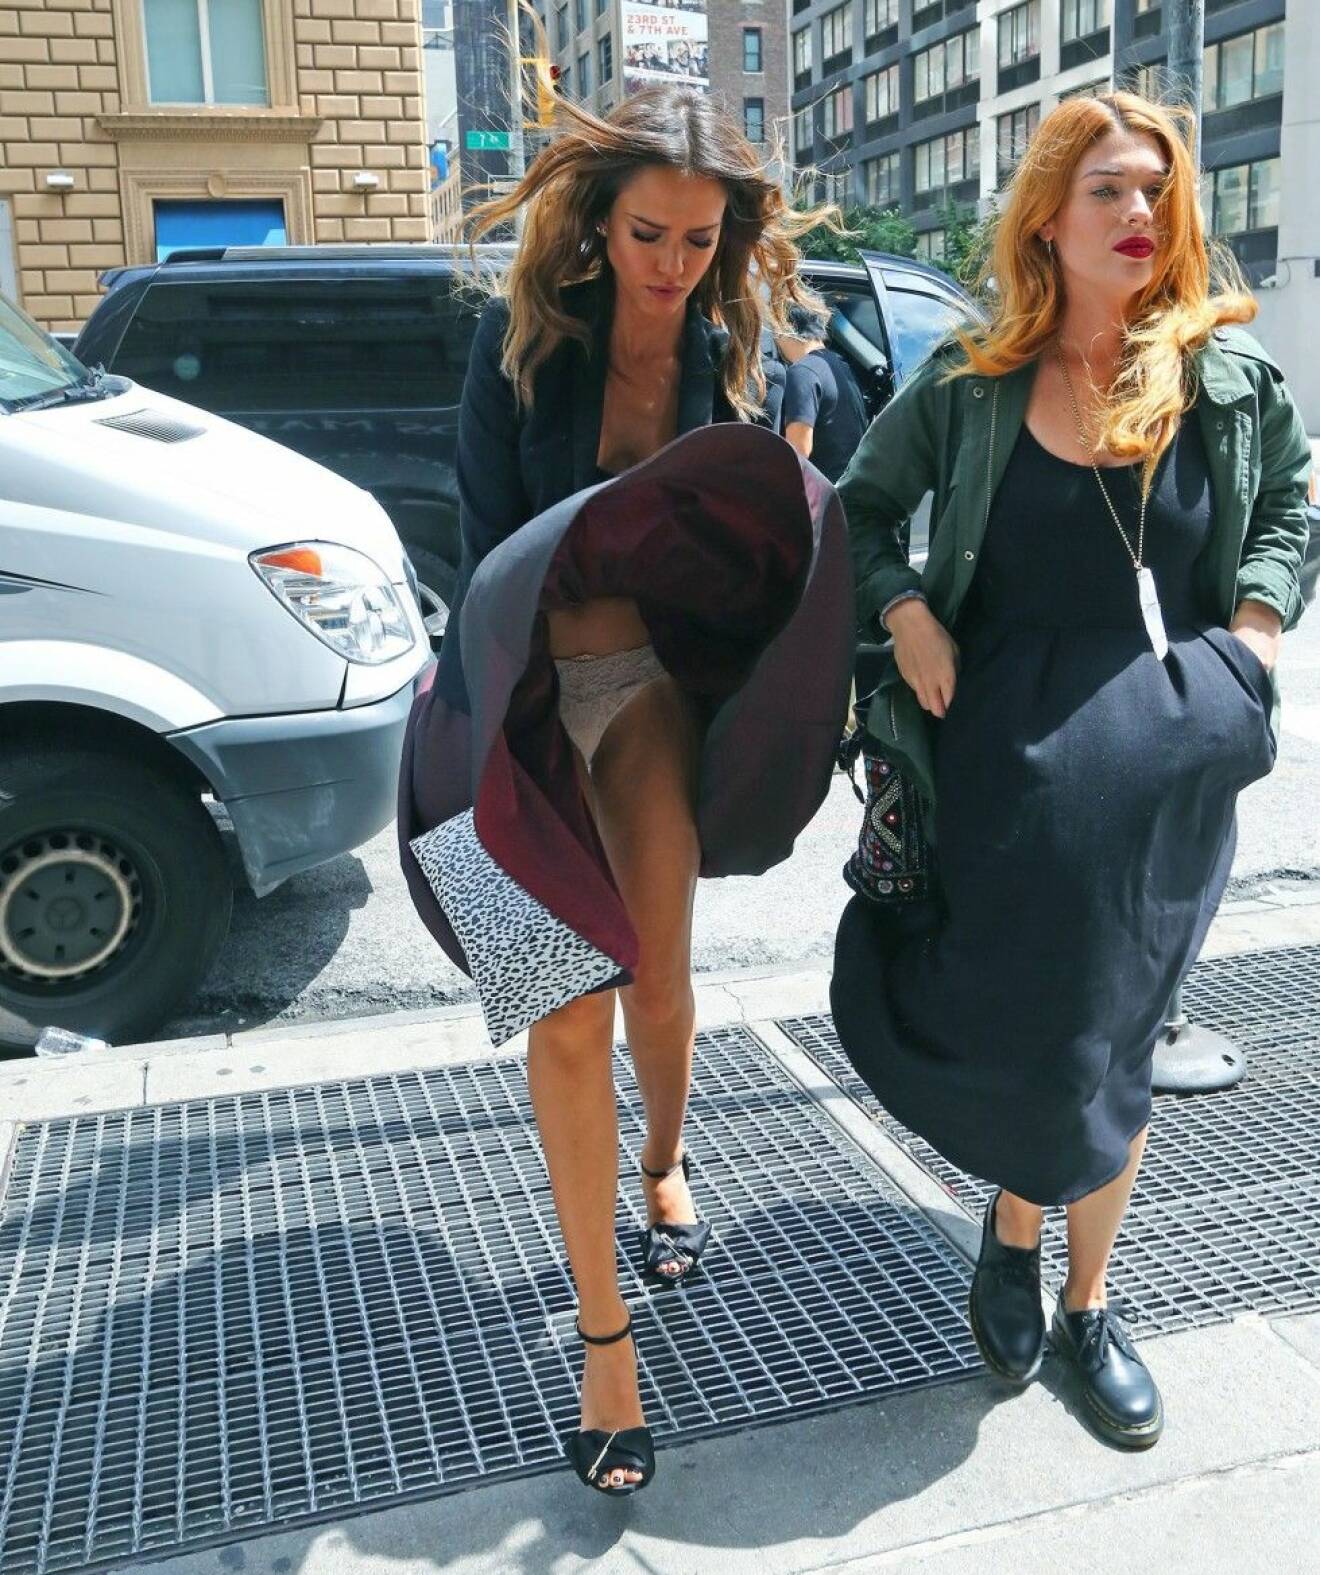 EXCLUSIVE: Jessica Alba wardrobe malfunction on windy day in NYC